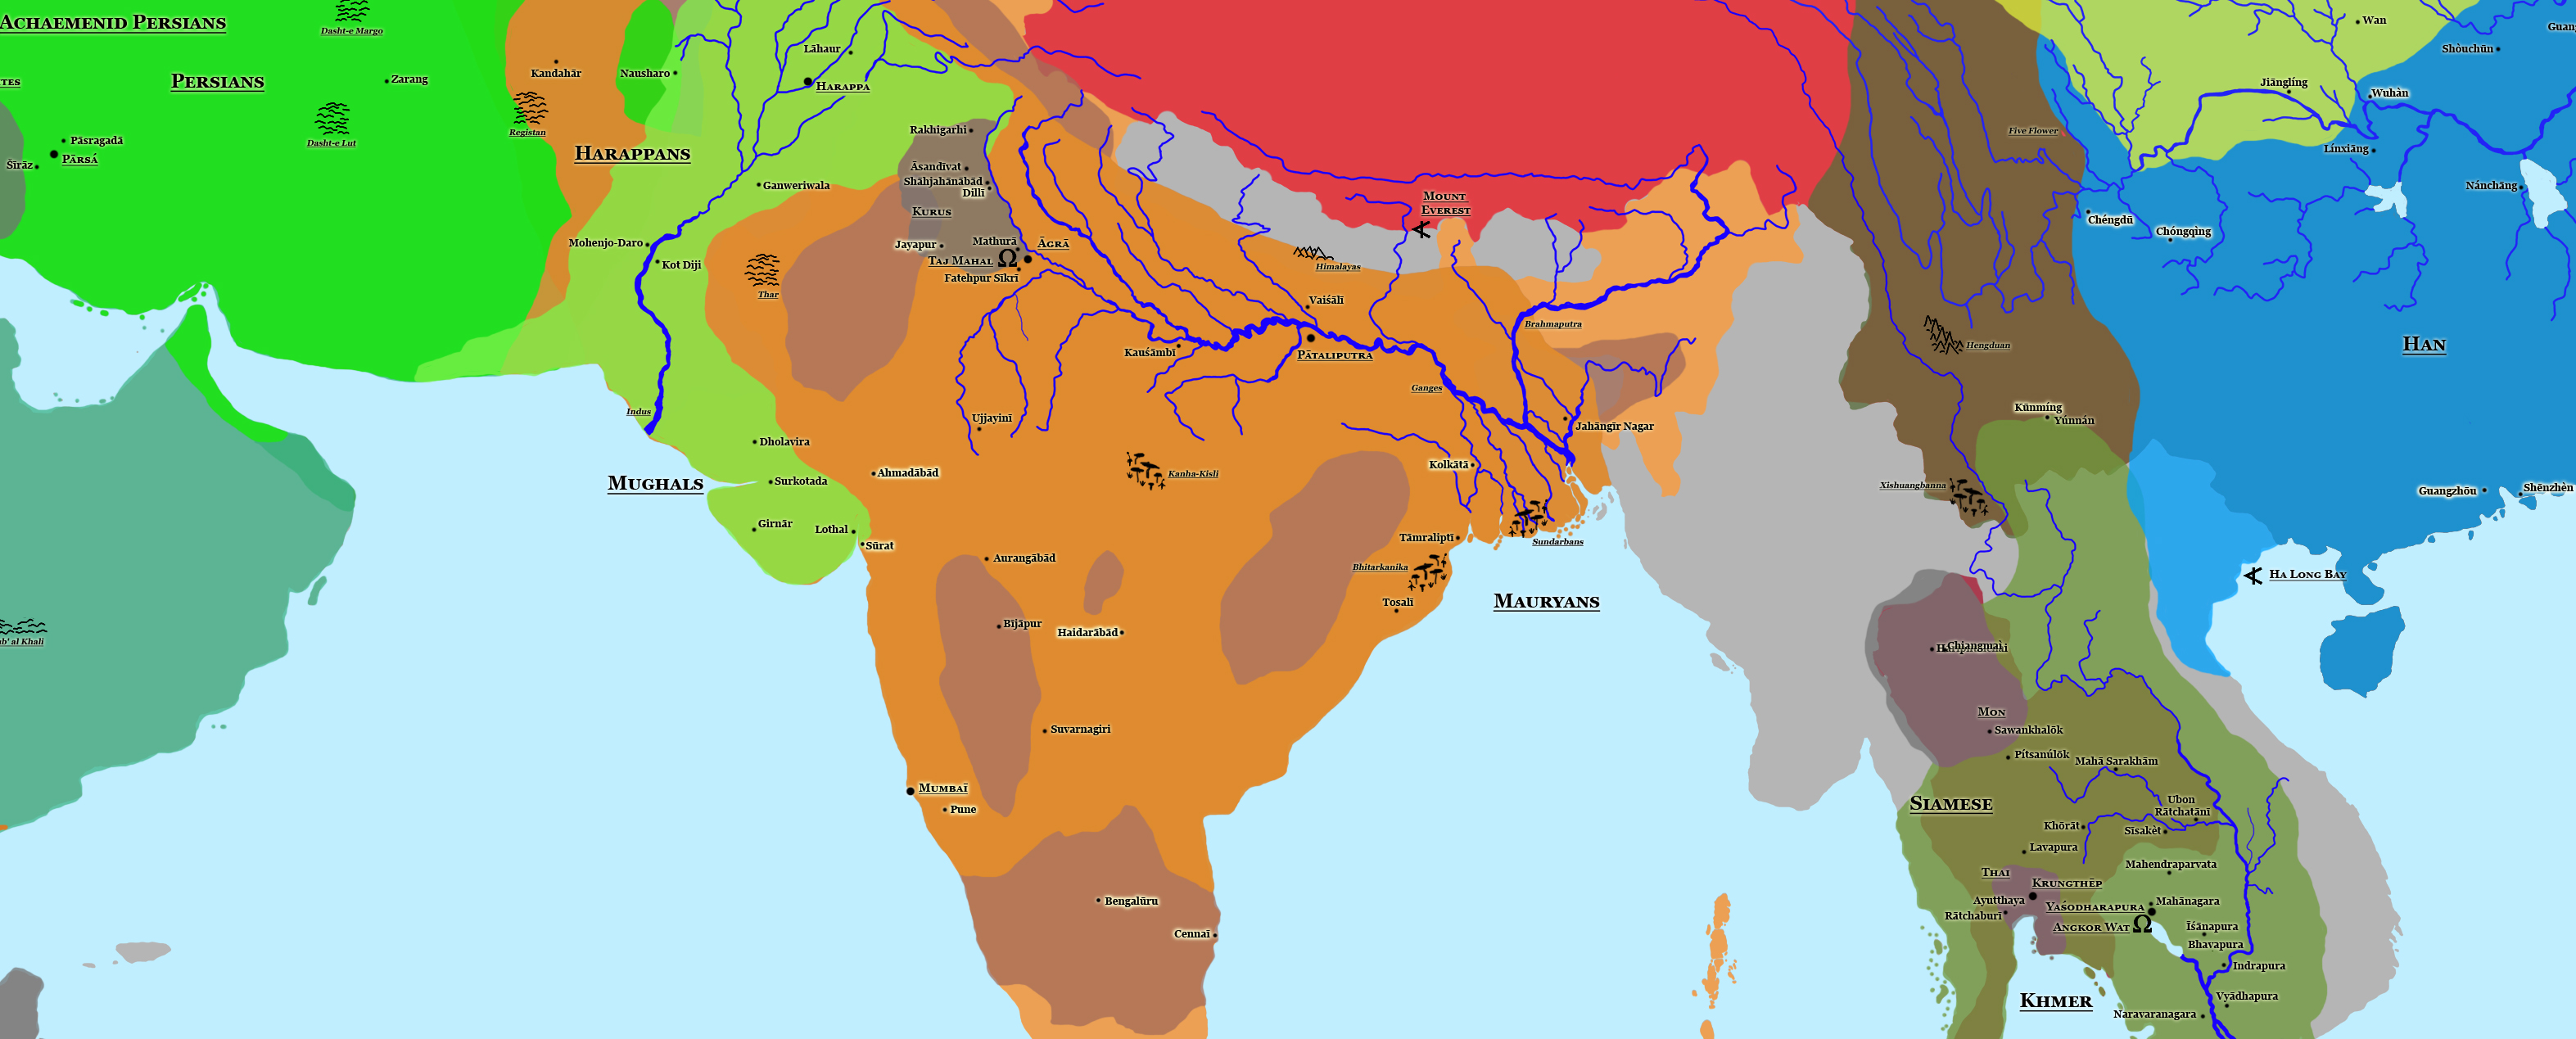 Indian Subcontinent.